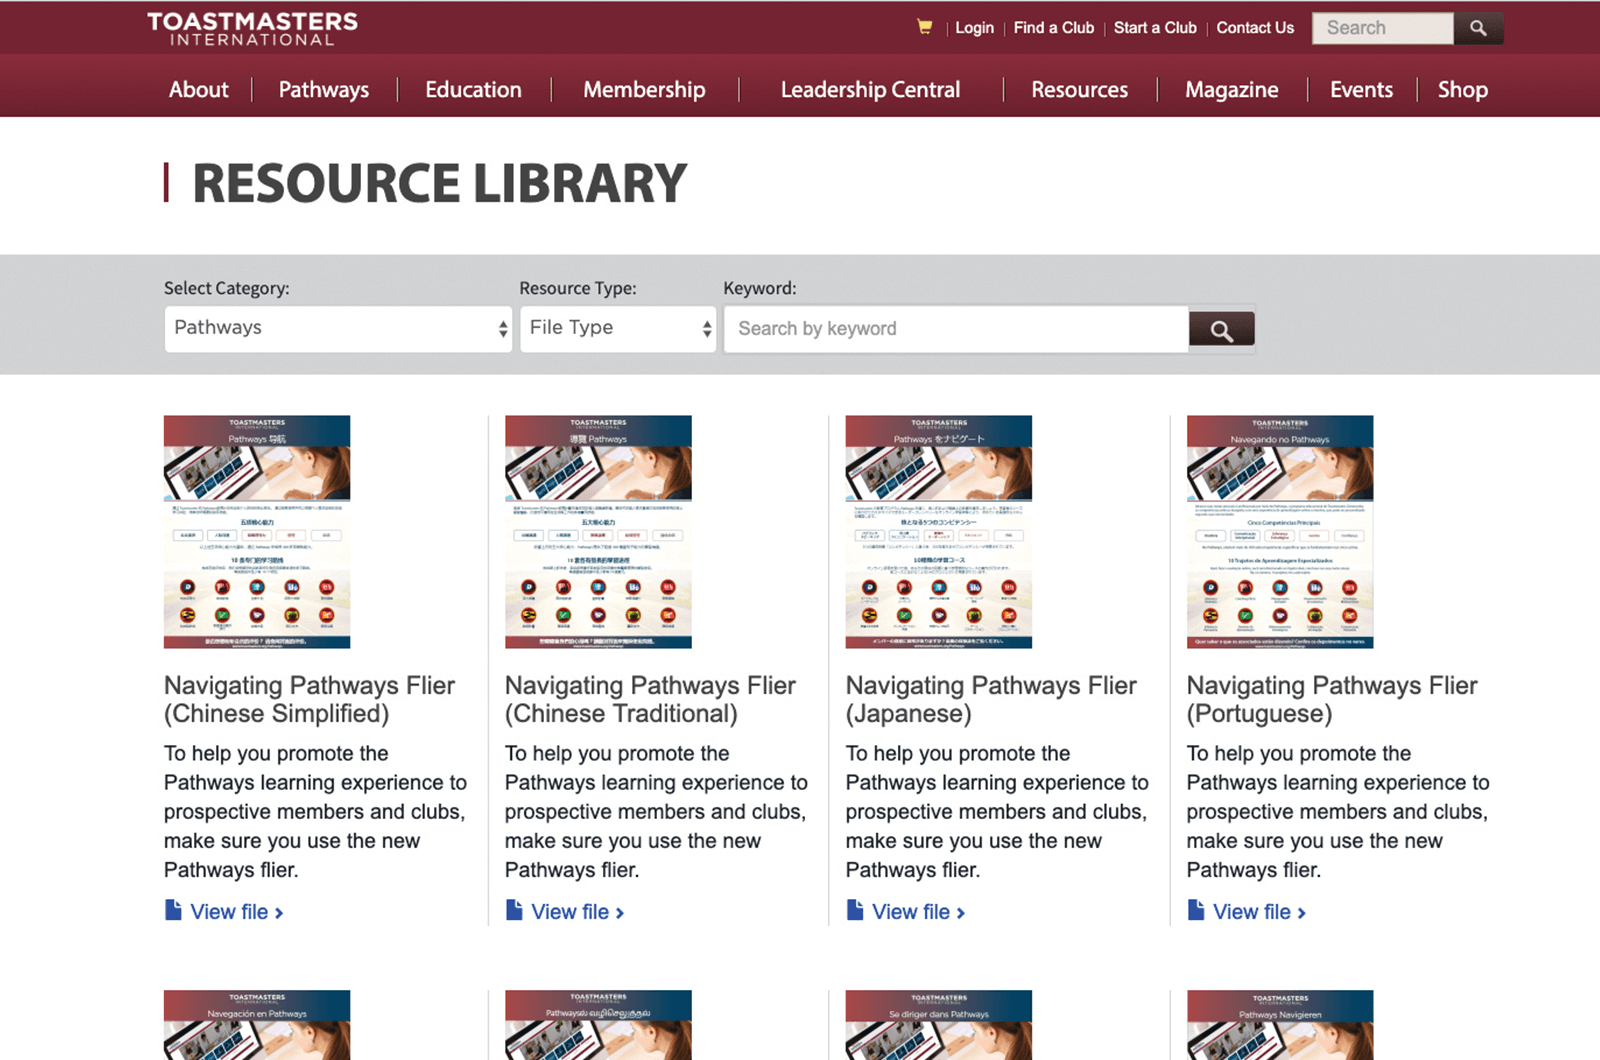 Resources Library webpage showing Navigating Pathways fliers in multiple languages